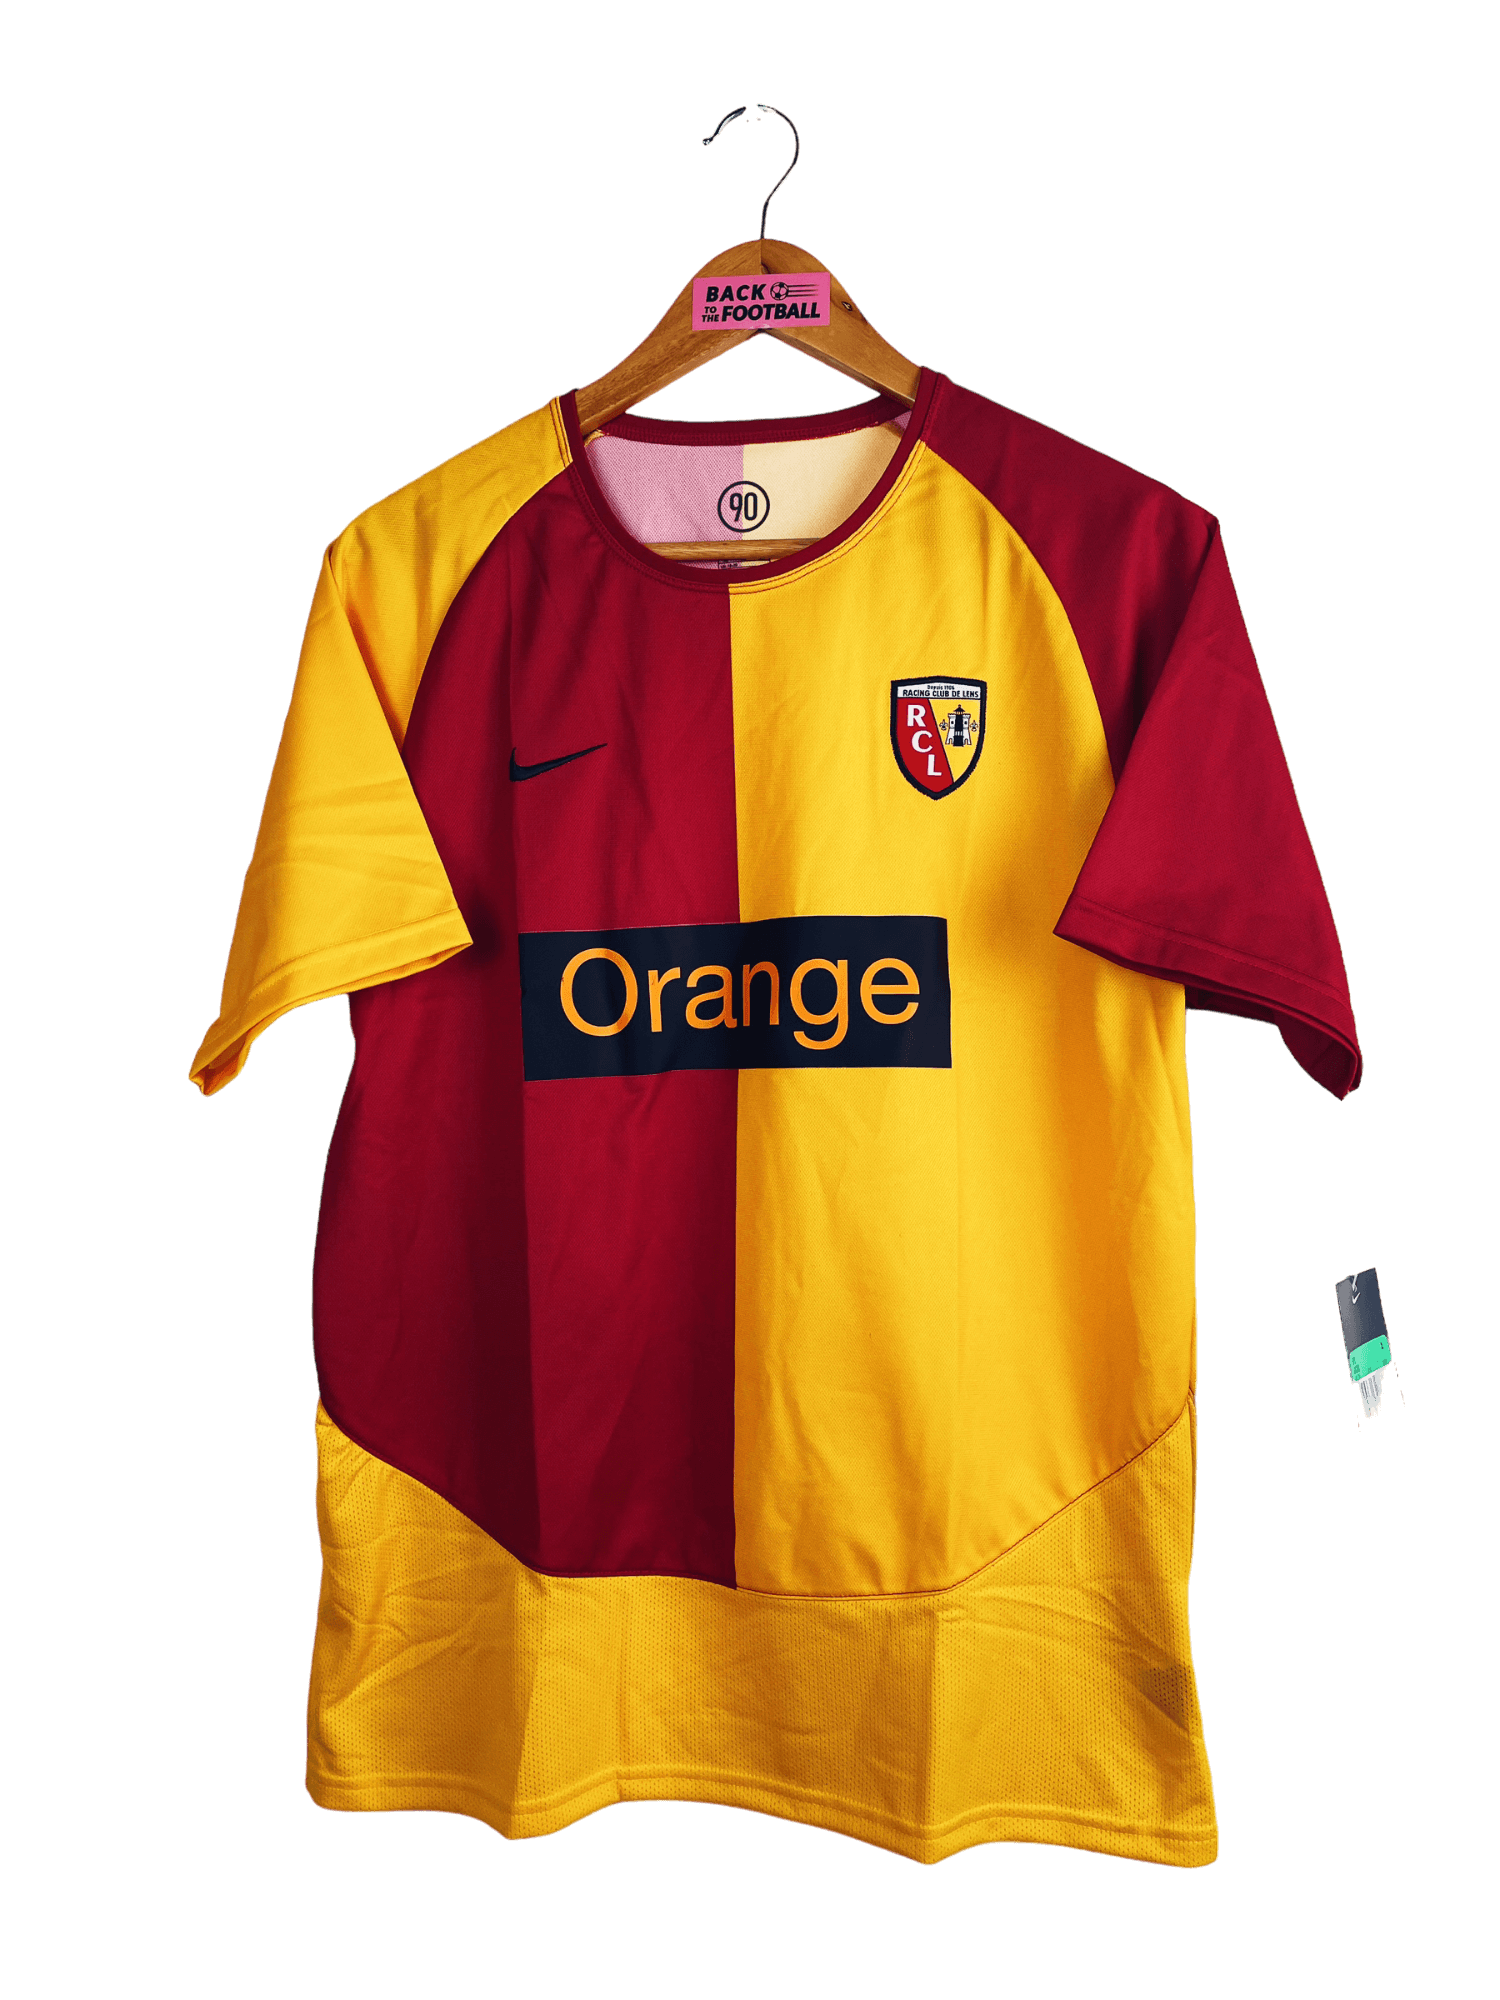 Maillot vintage 2004 / 2005 - RC Lens (XL enfant) *BNWT* - Back To The  Football